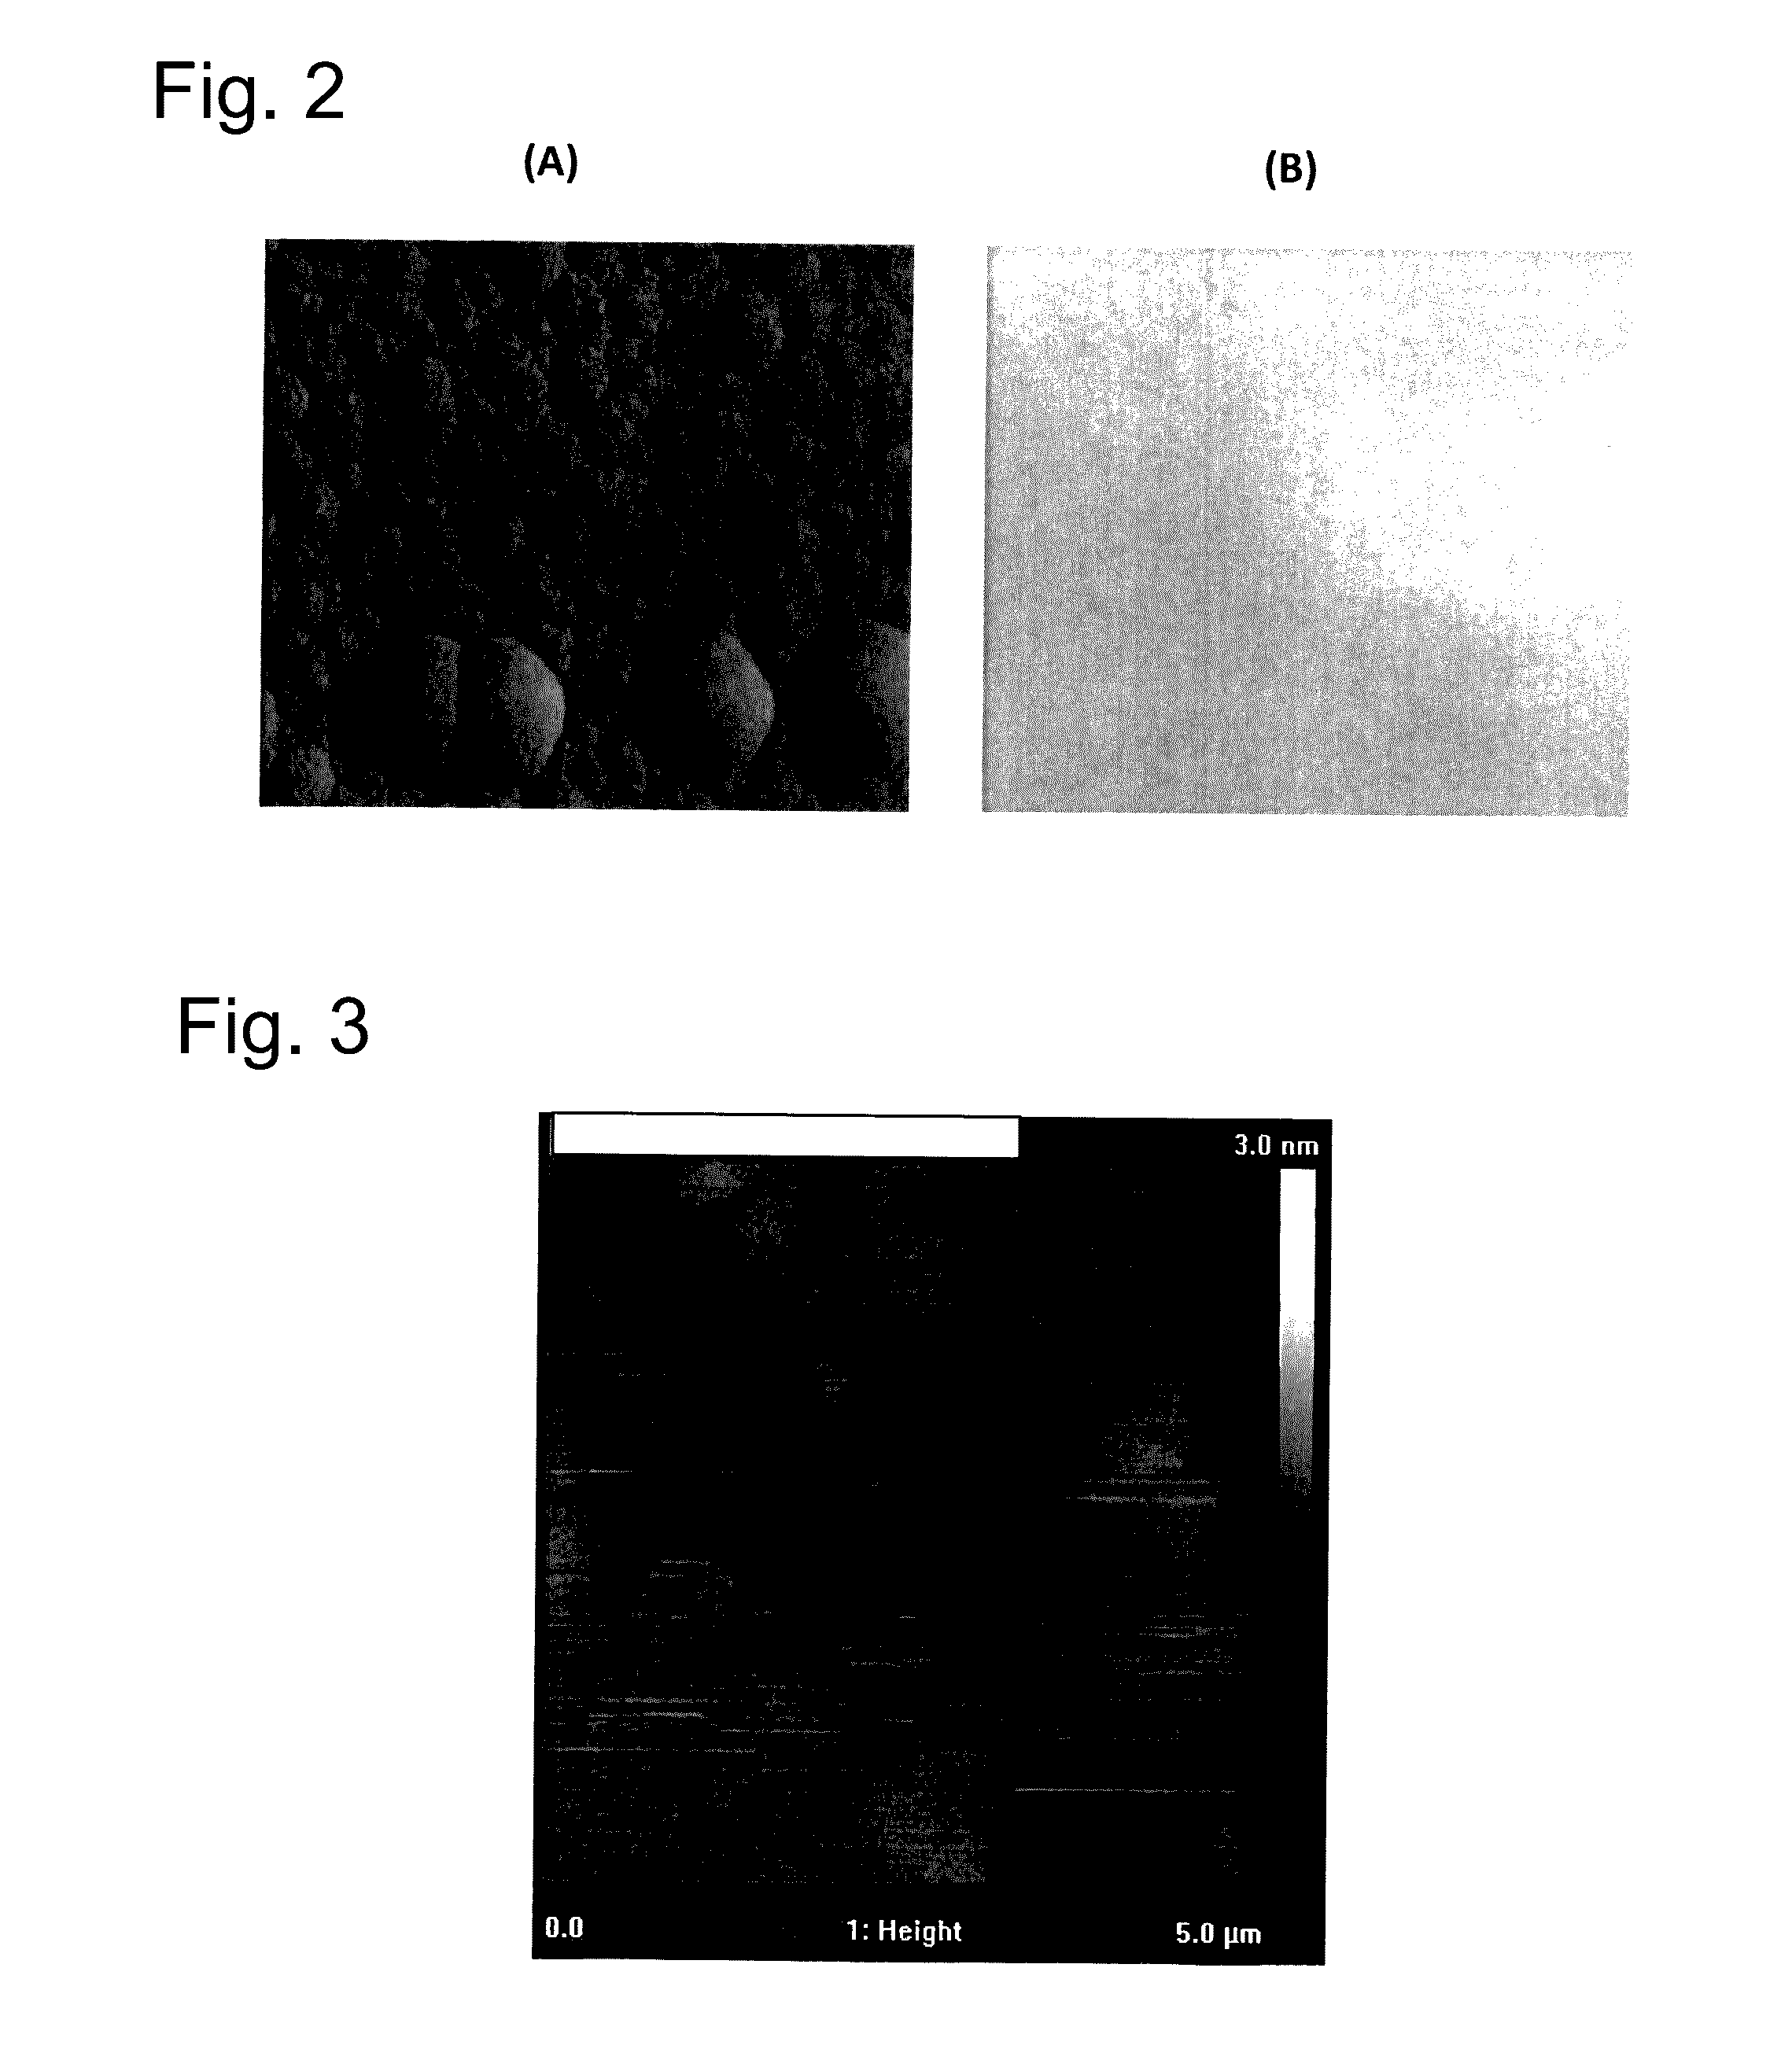 Diamond components for quantum imaging, sensing and information processing devices